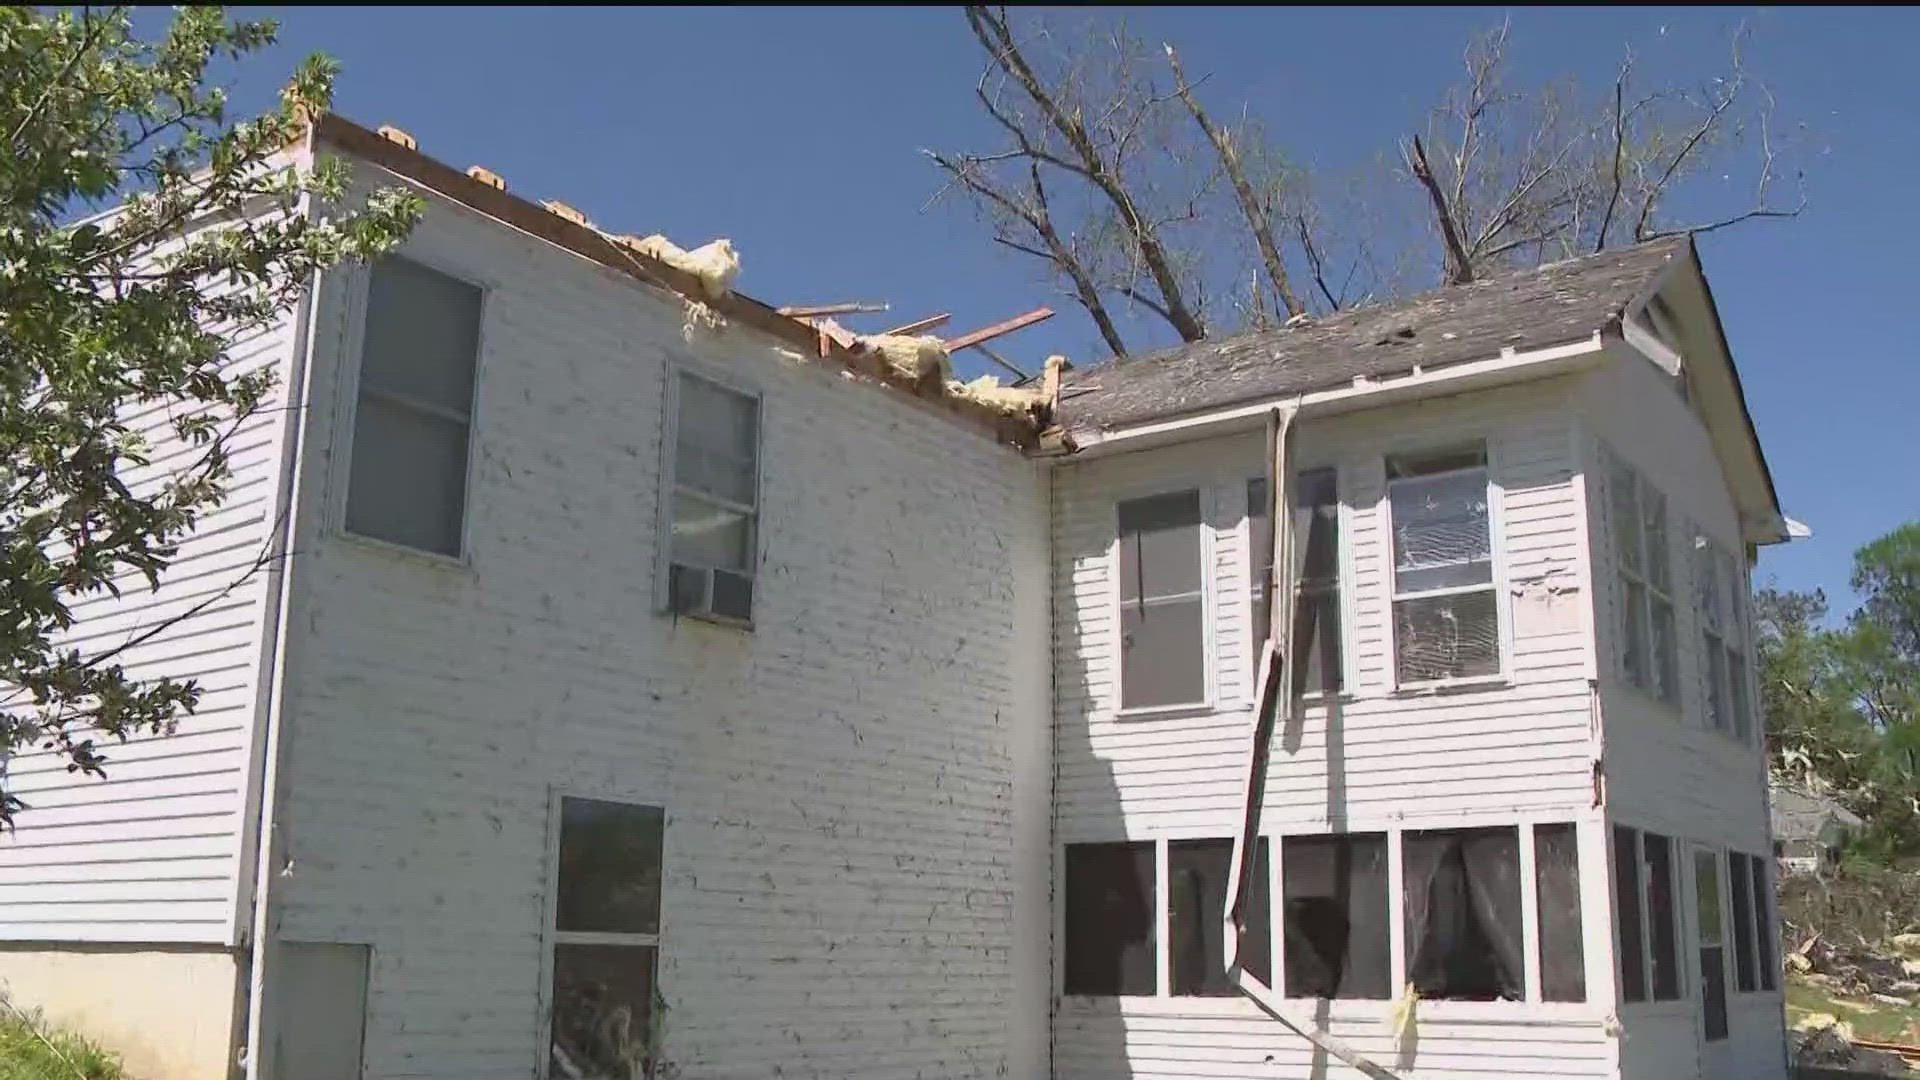 11Alive Meteorologist Melissa Nord explained how National Weather Service crews are working to determine the path and strength of the tornado.